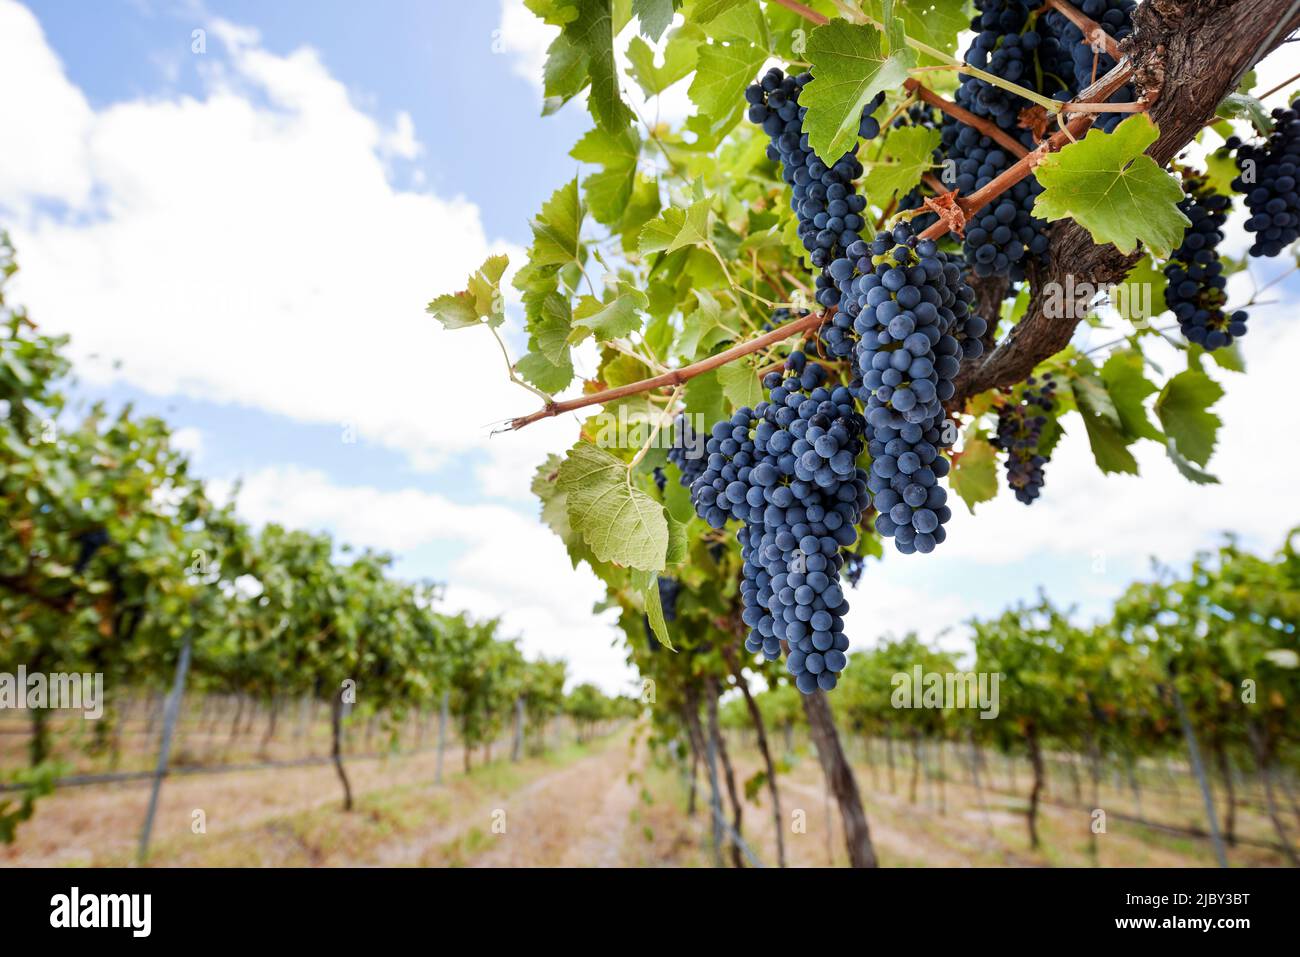 Purple grapes hanging from grapevines in vineyard Stock Photo